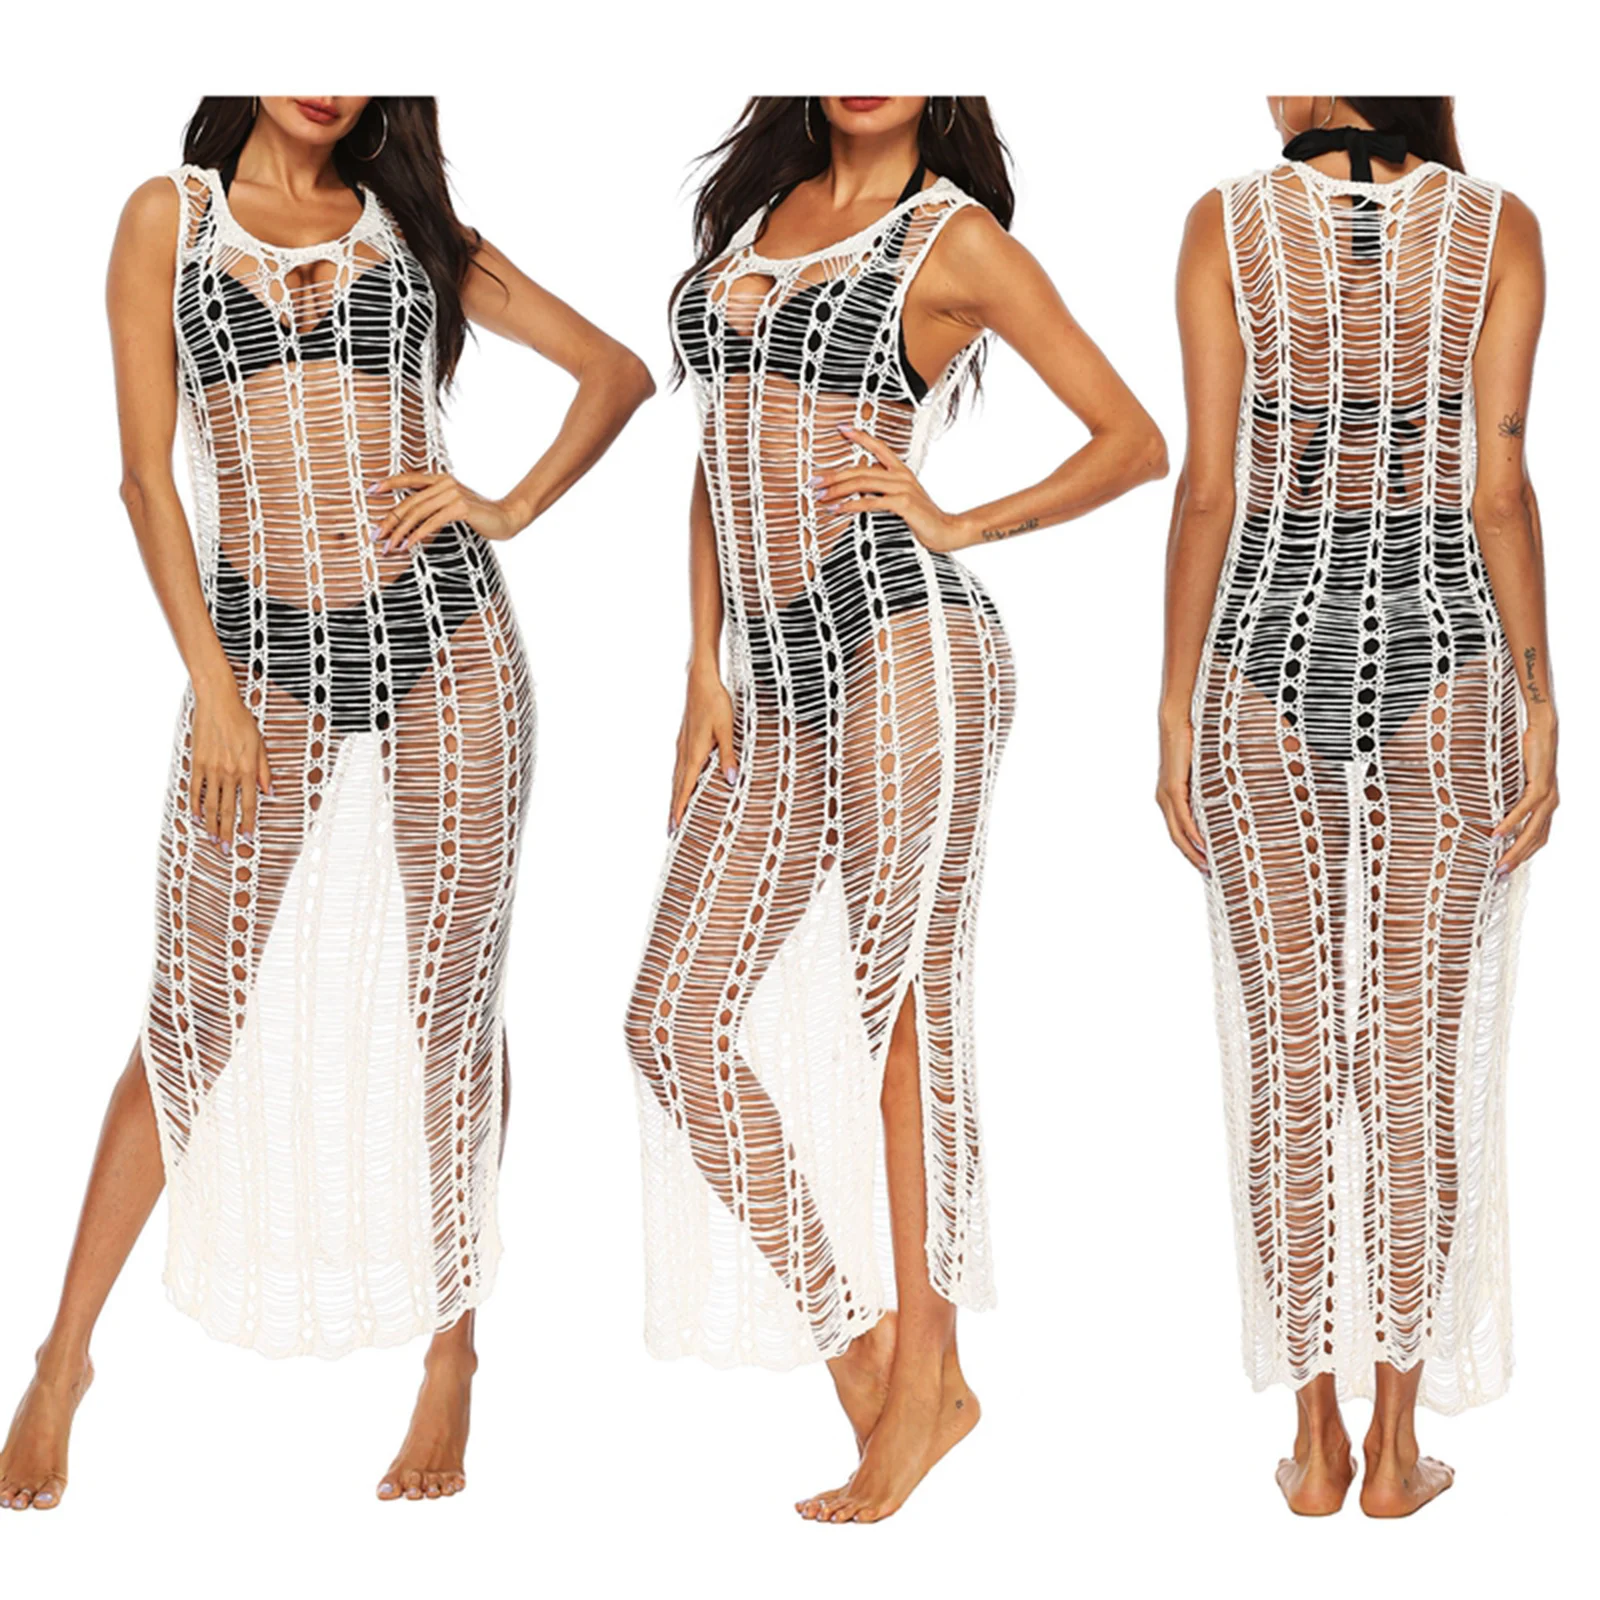 Women Cover-Ups Hollow out Summer Sexy Beachwear Solid Color Hollow Out Split Sleeveless Long Cover Up Swimwear 2022 New crochet bathing suit cover up